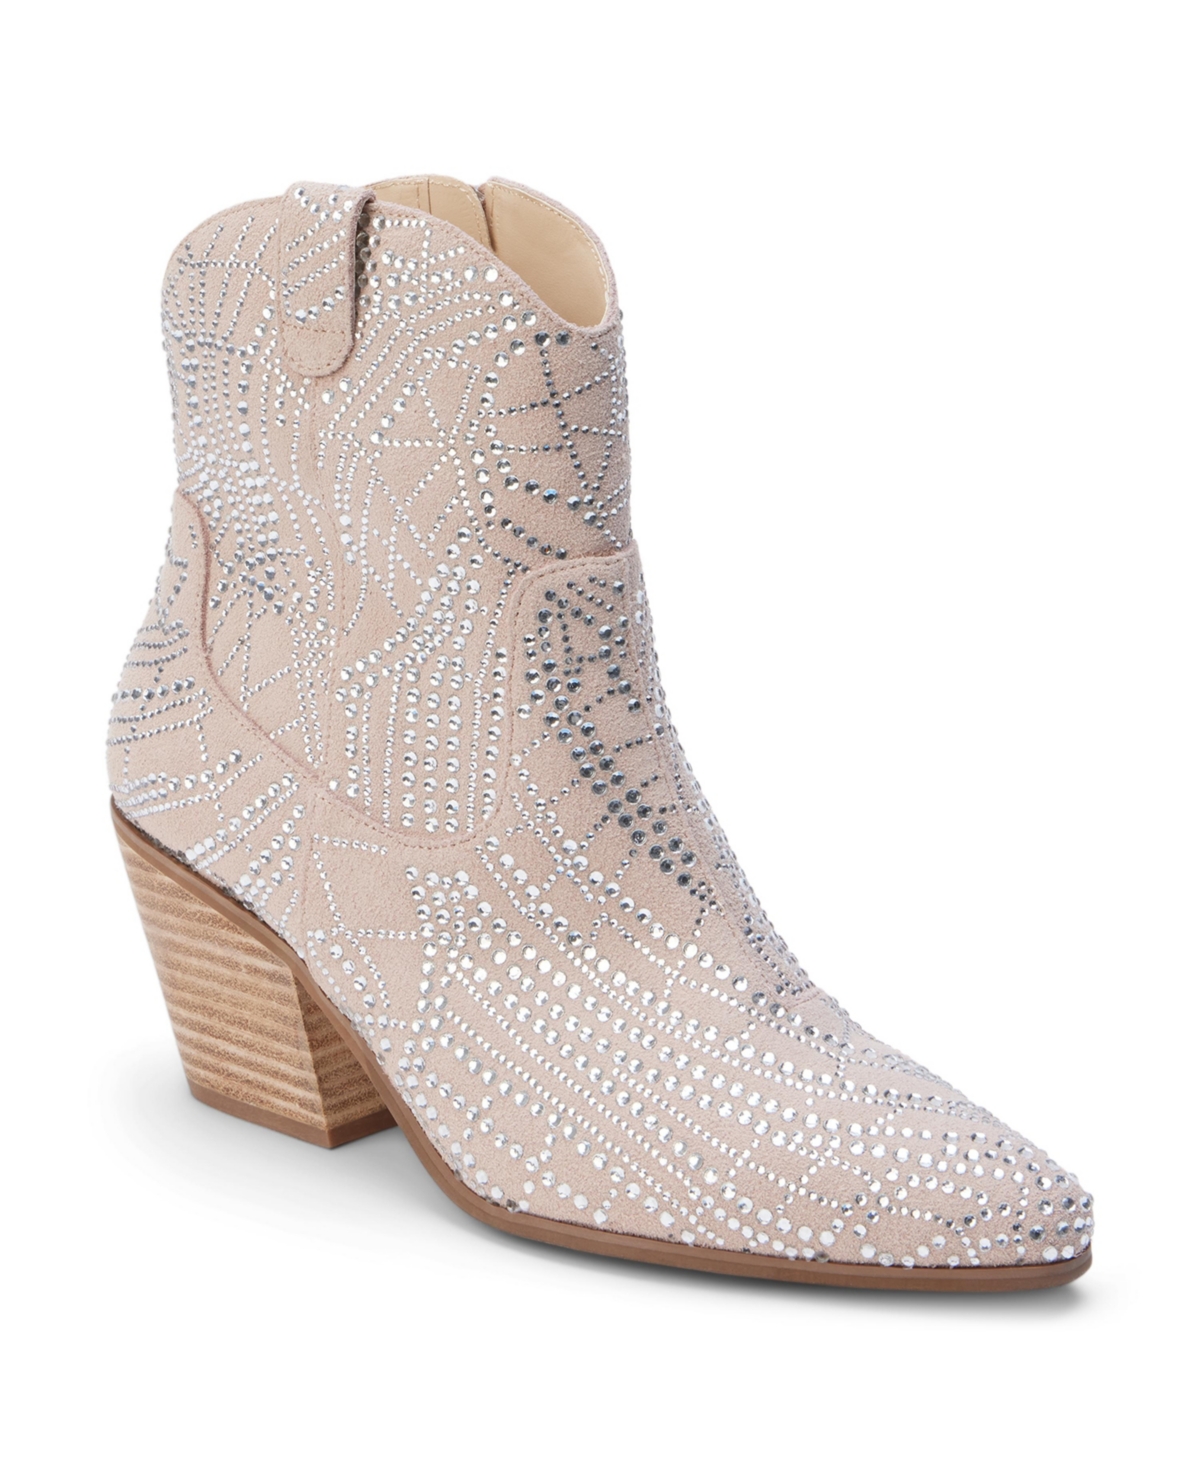 MATISSE HEIDI WOMENS ANKLE BOOTS